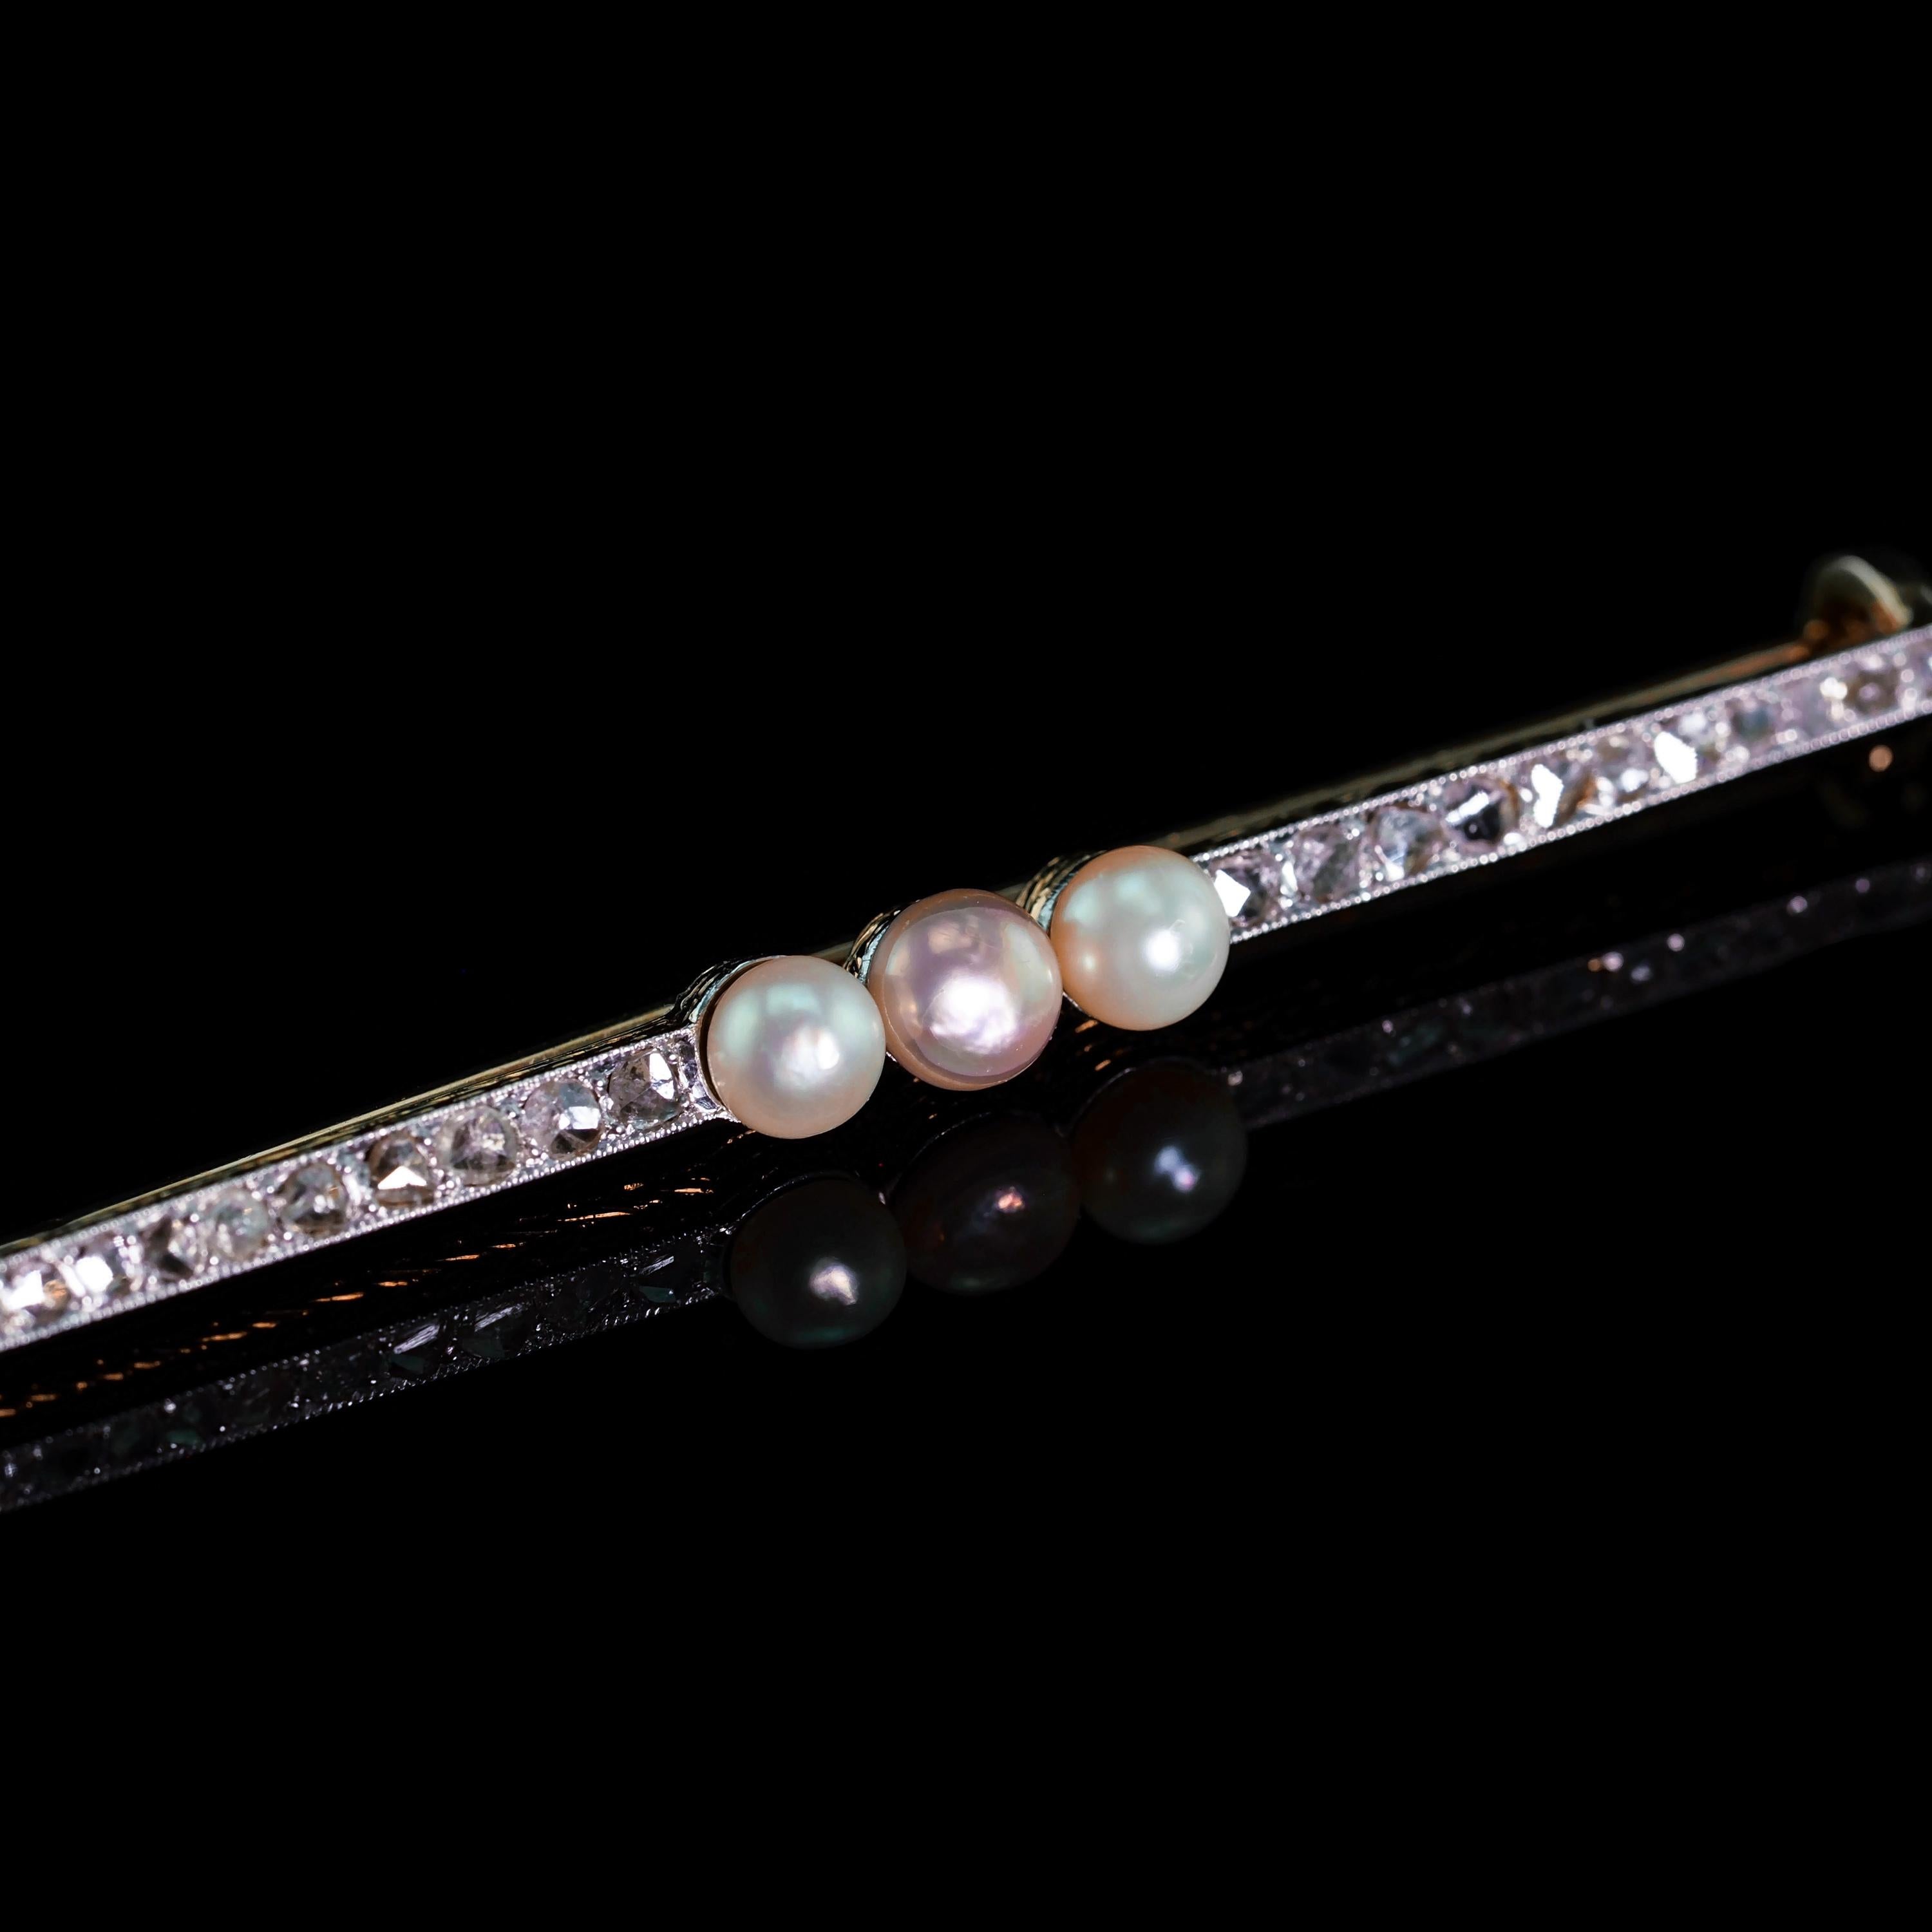 Antique 18ct Gold & Platinum Pink Pearl & Diamond Brooch - c.1920 For Sale 3